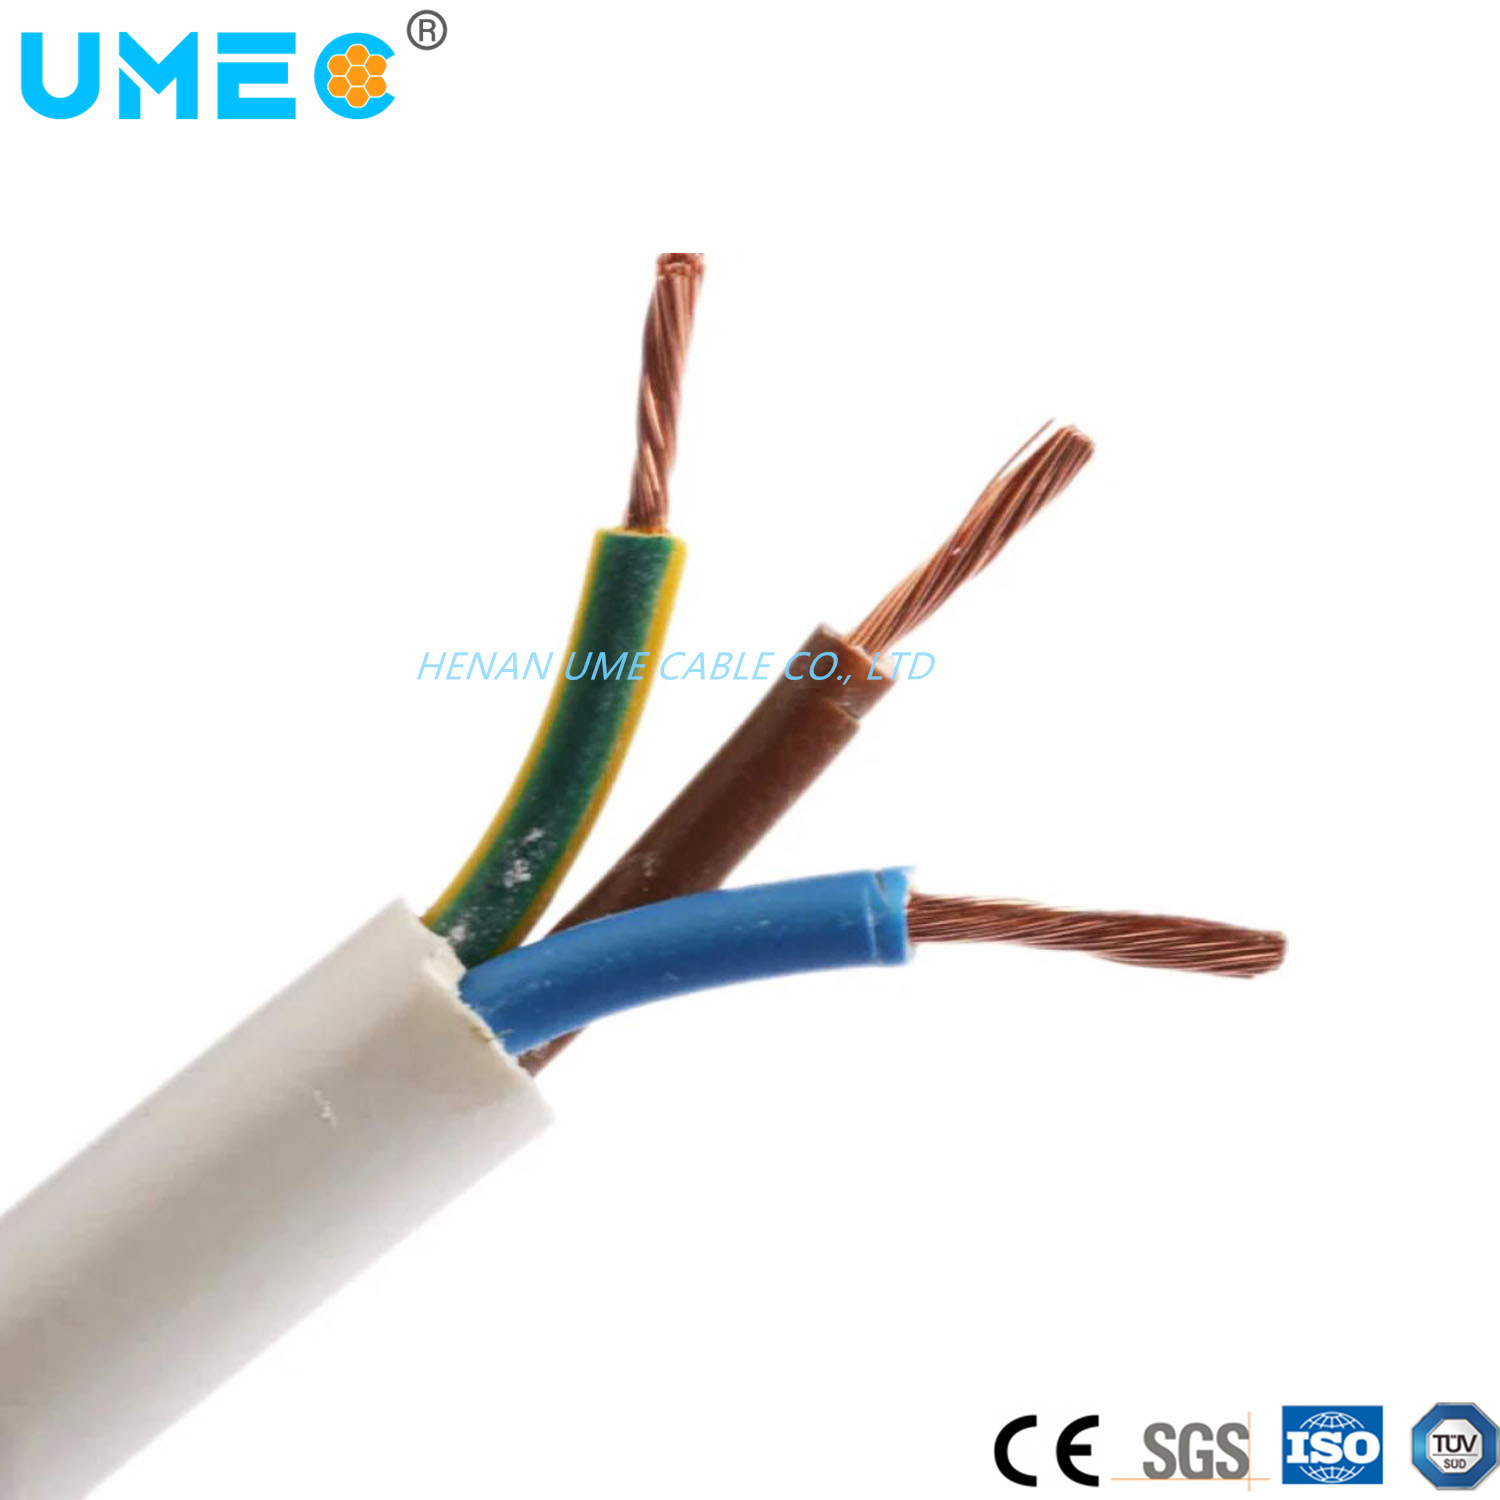 300/500V Owy H05VV-F Cable Copper Conductor Thermoplastic PVC Insulated Sheath Cable 3gx2.5mm2 4gx2.5mm2